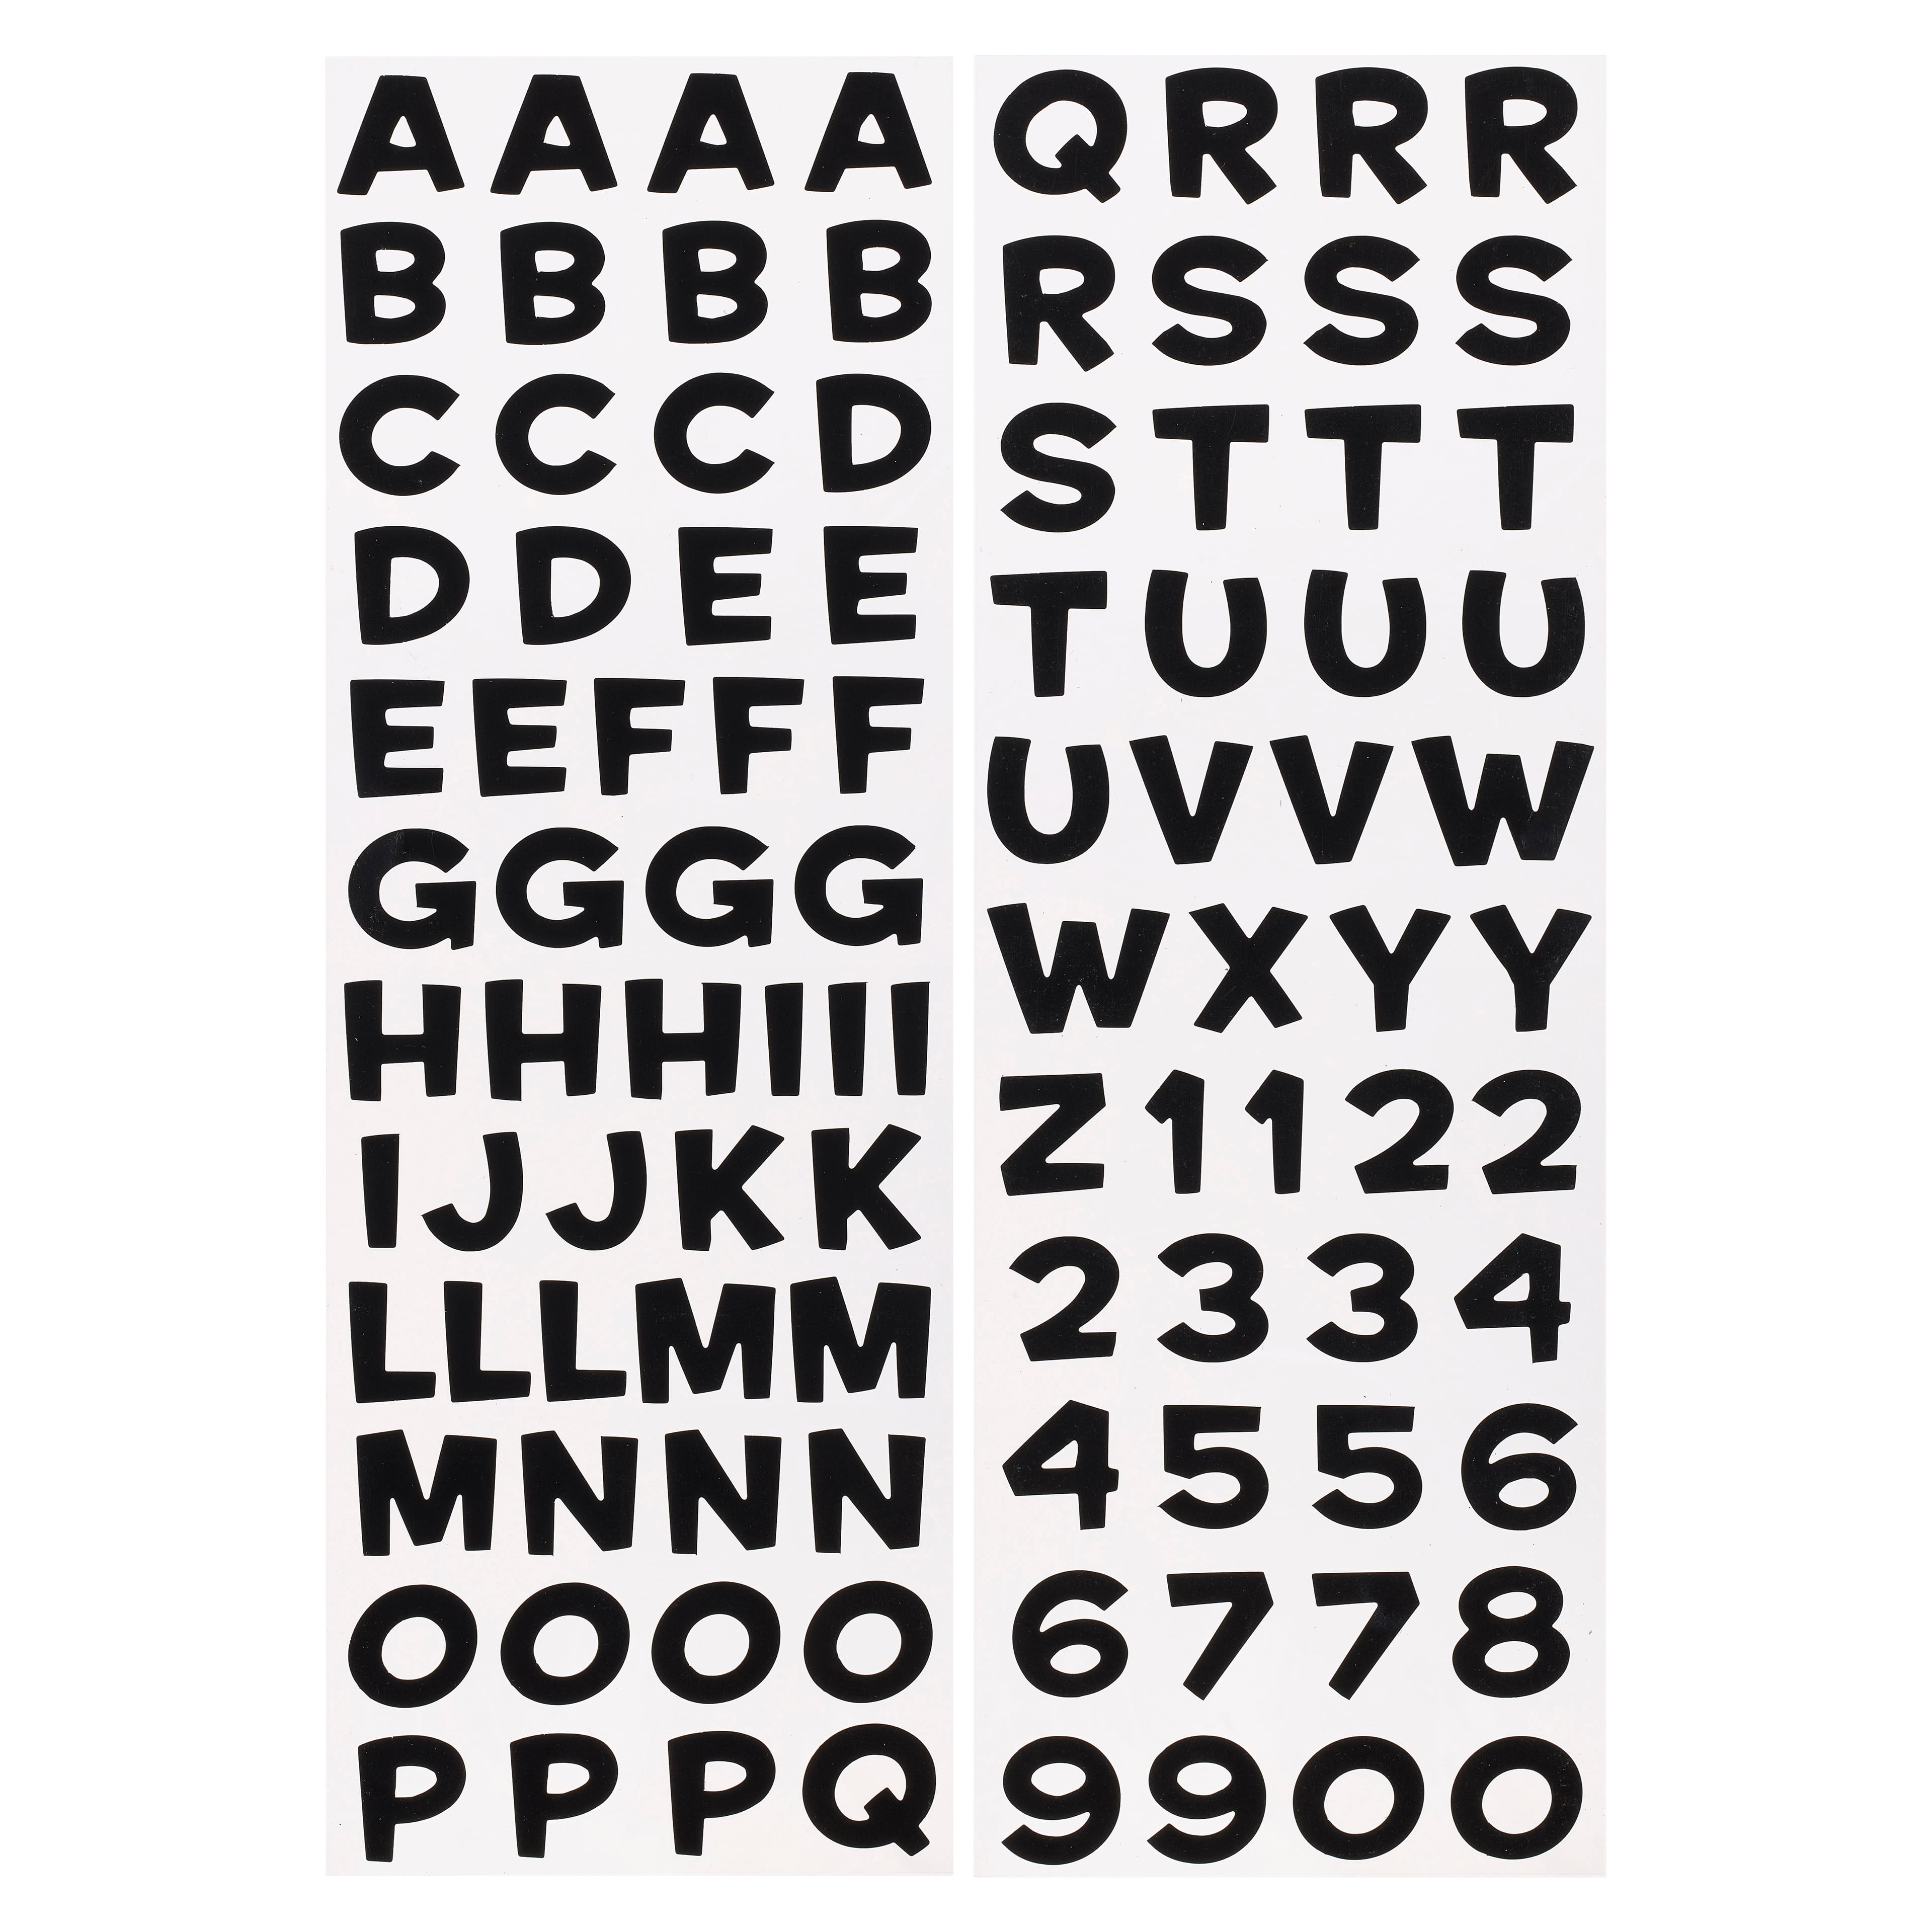 Large White Block Alphabet Stickers by Recollections™